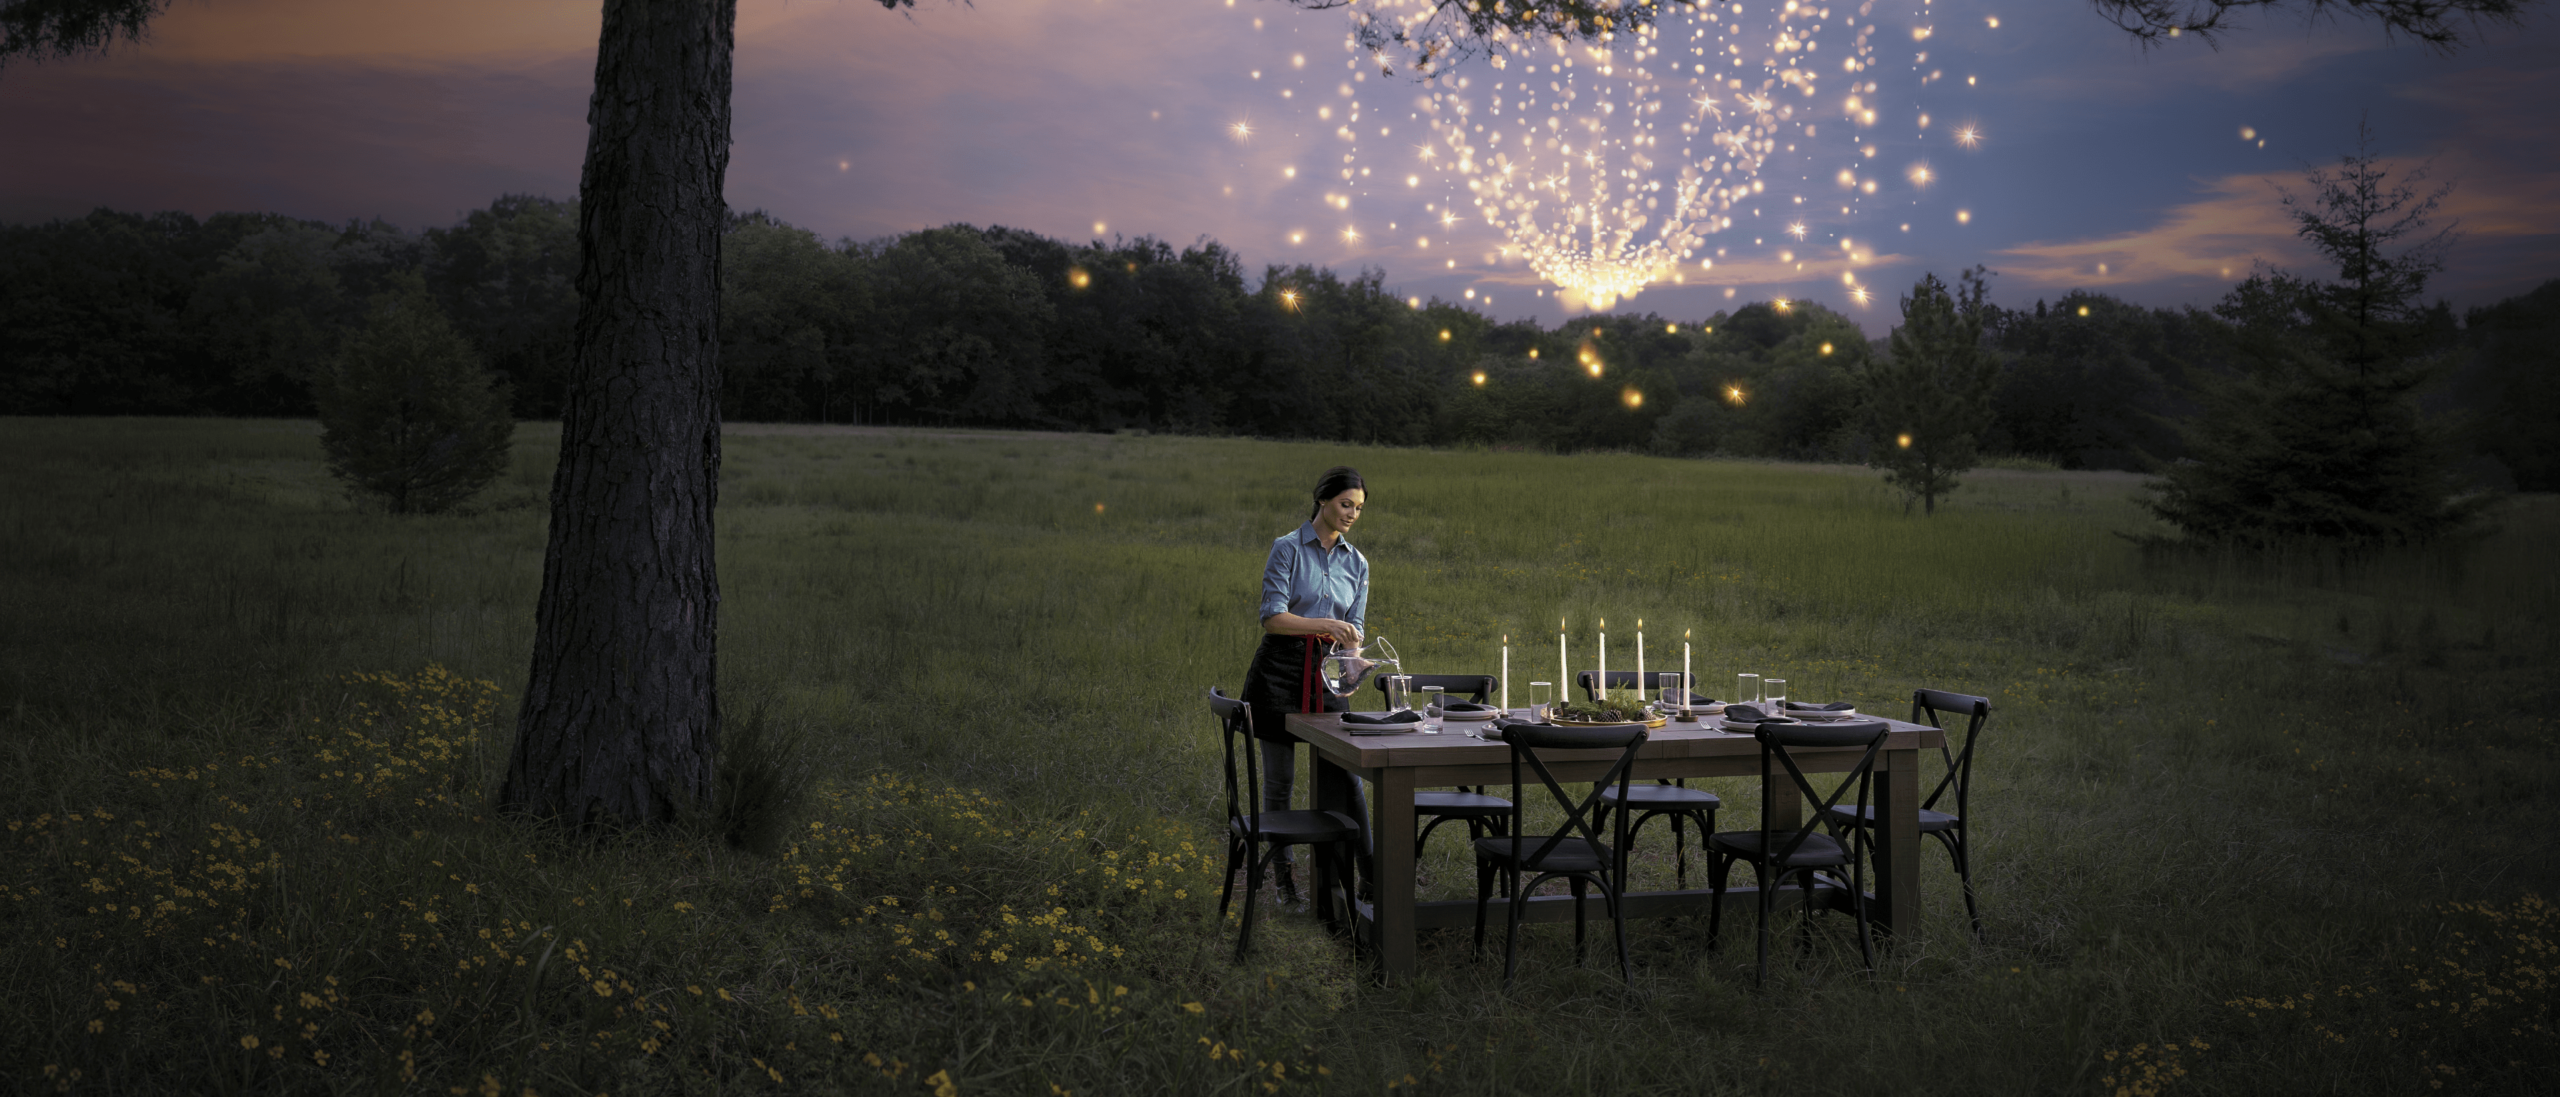 A waiter pours water at a set dining table in the middle of a grassy field. A chandelier of fireflies lights the scene.